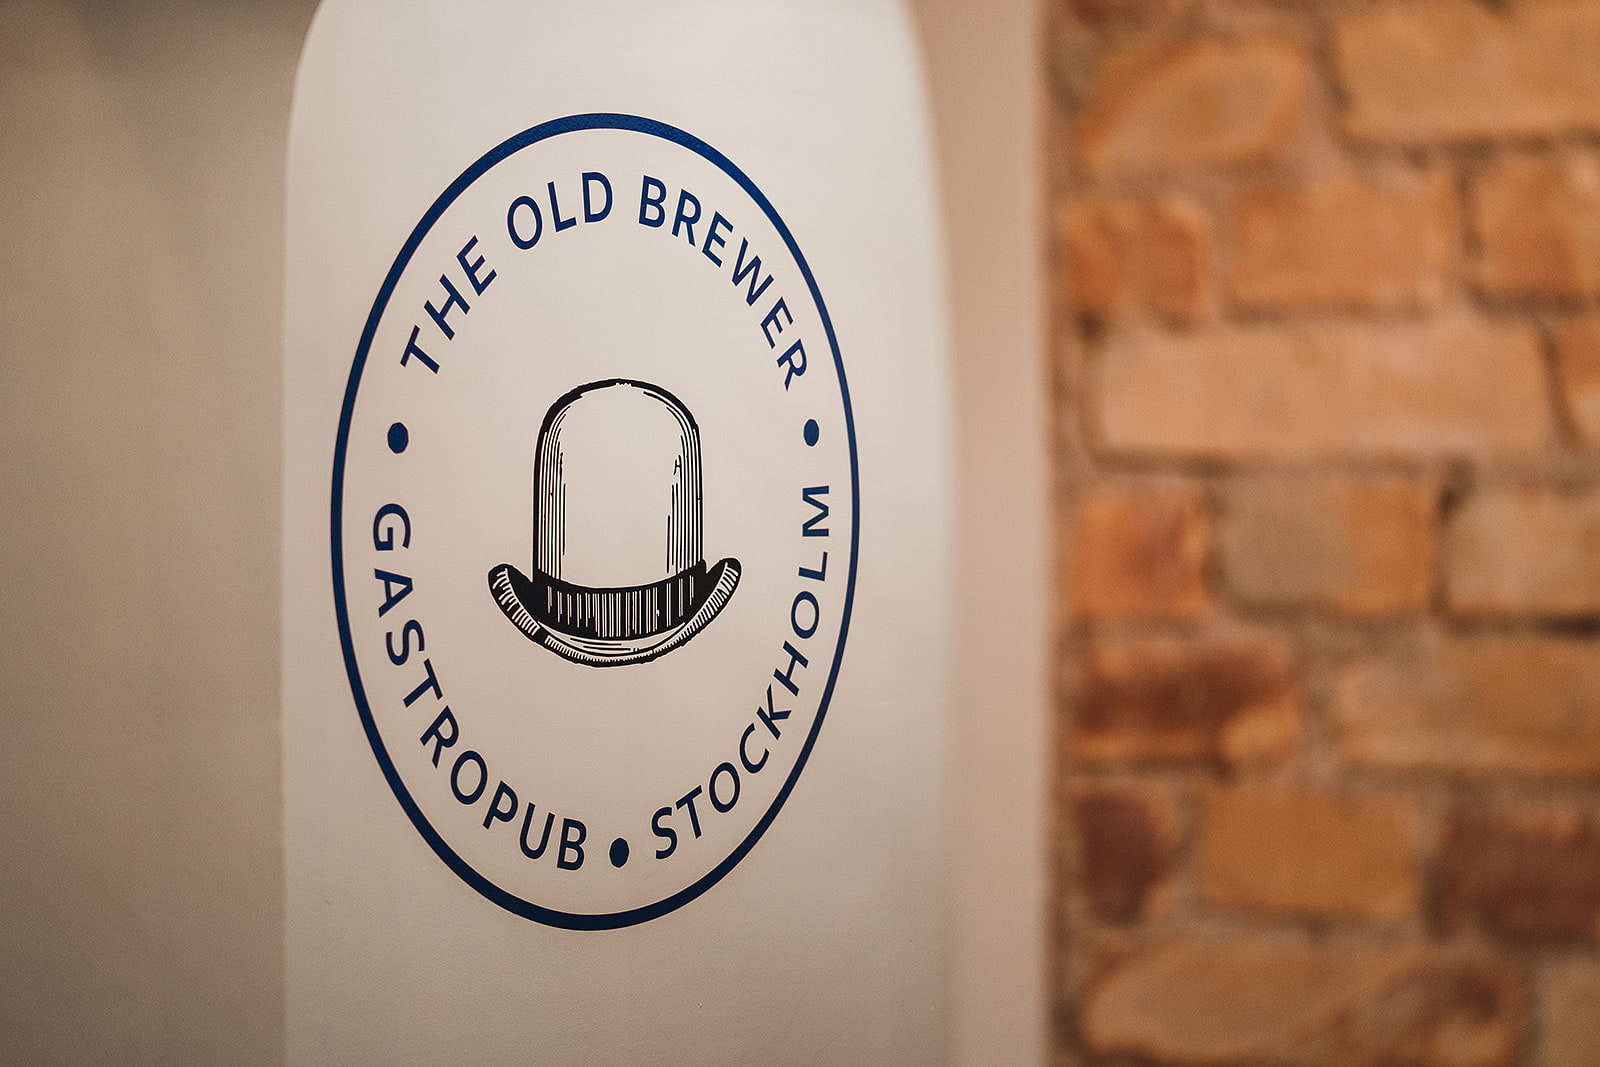 The Old Brewer – Pubs